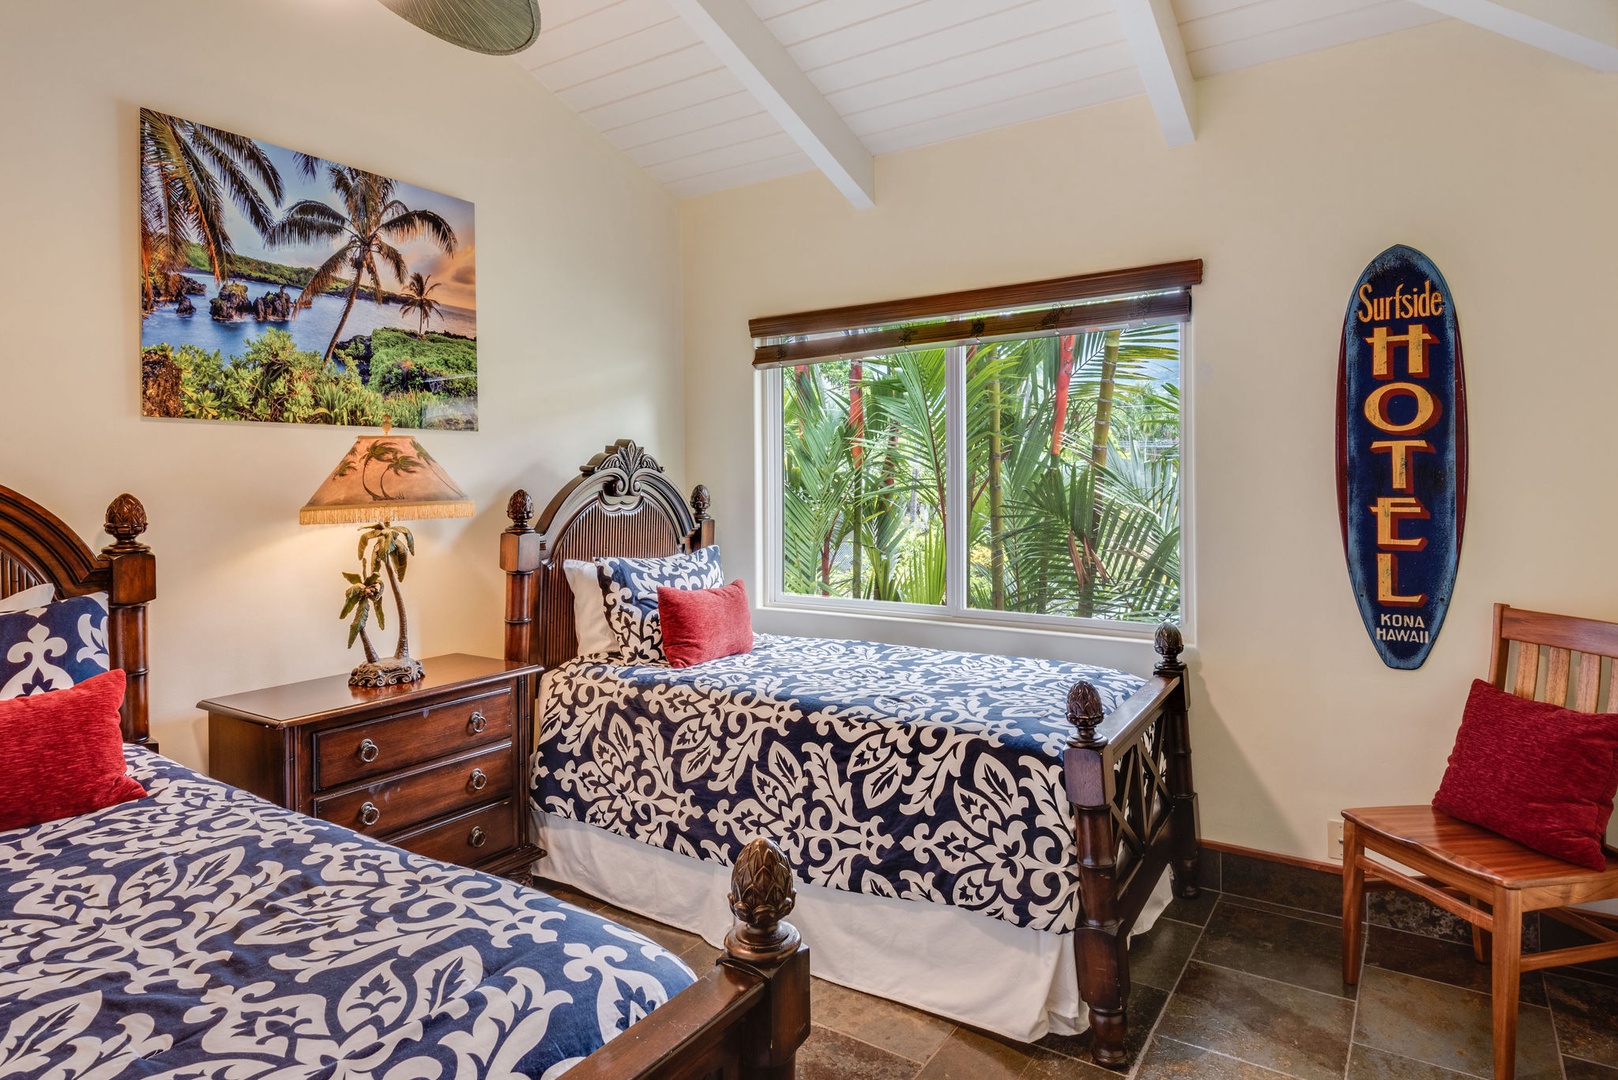 Kailua Kona Vacation Rentals, Kona Beach Bungalows** - Cozy up in Moana Hale's Twin Beds, perfect for friends or siblings sharing stories.